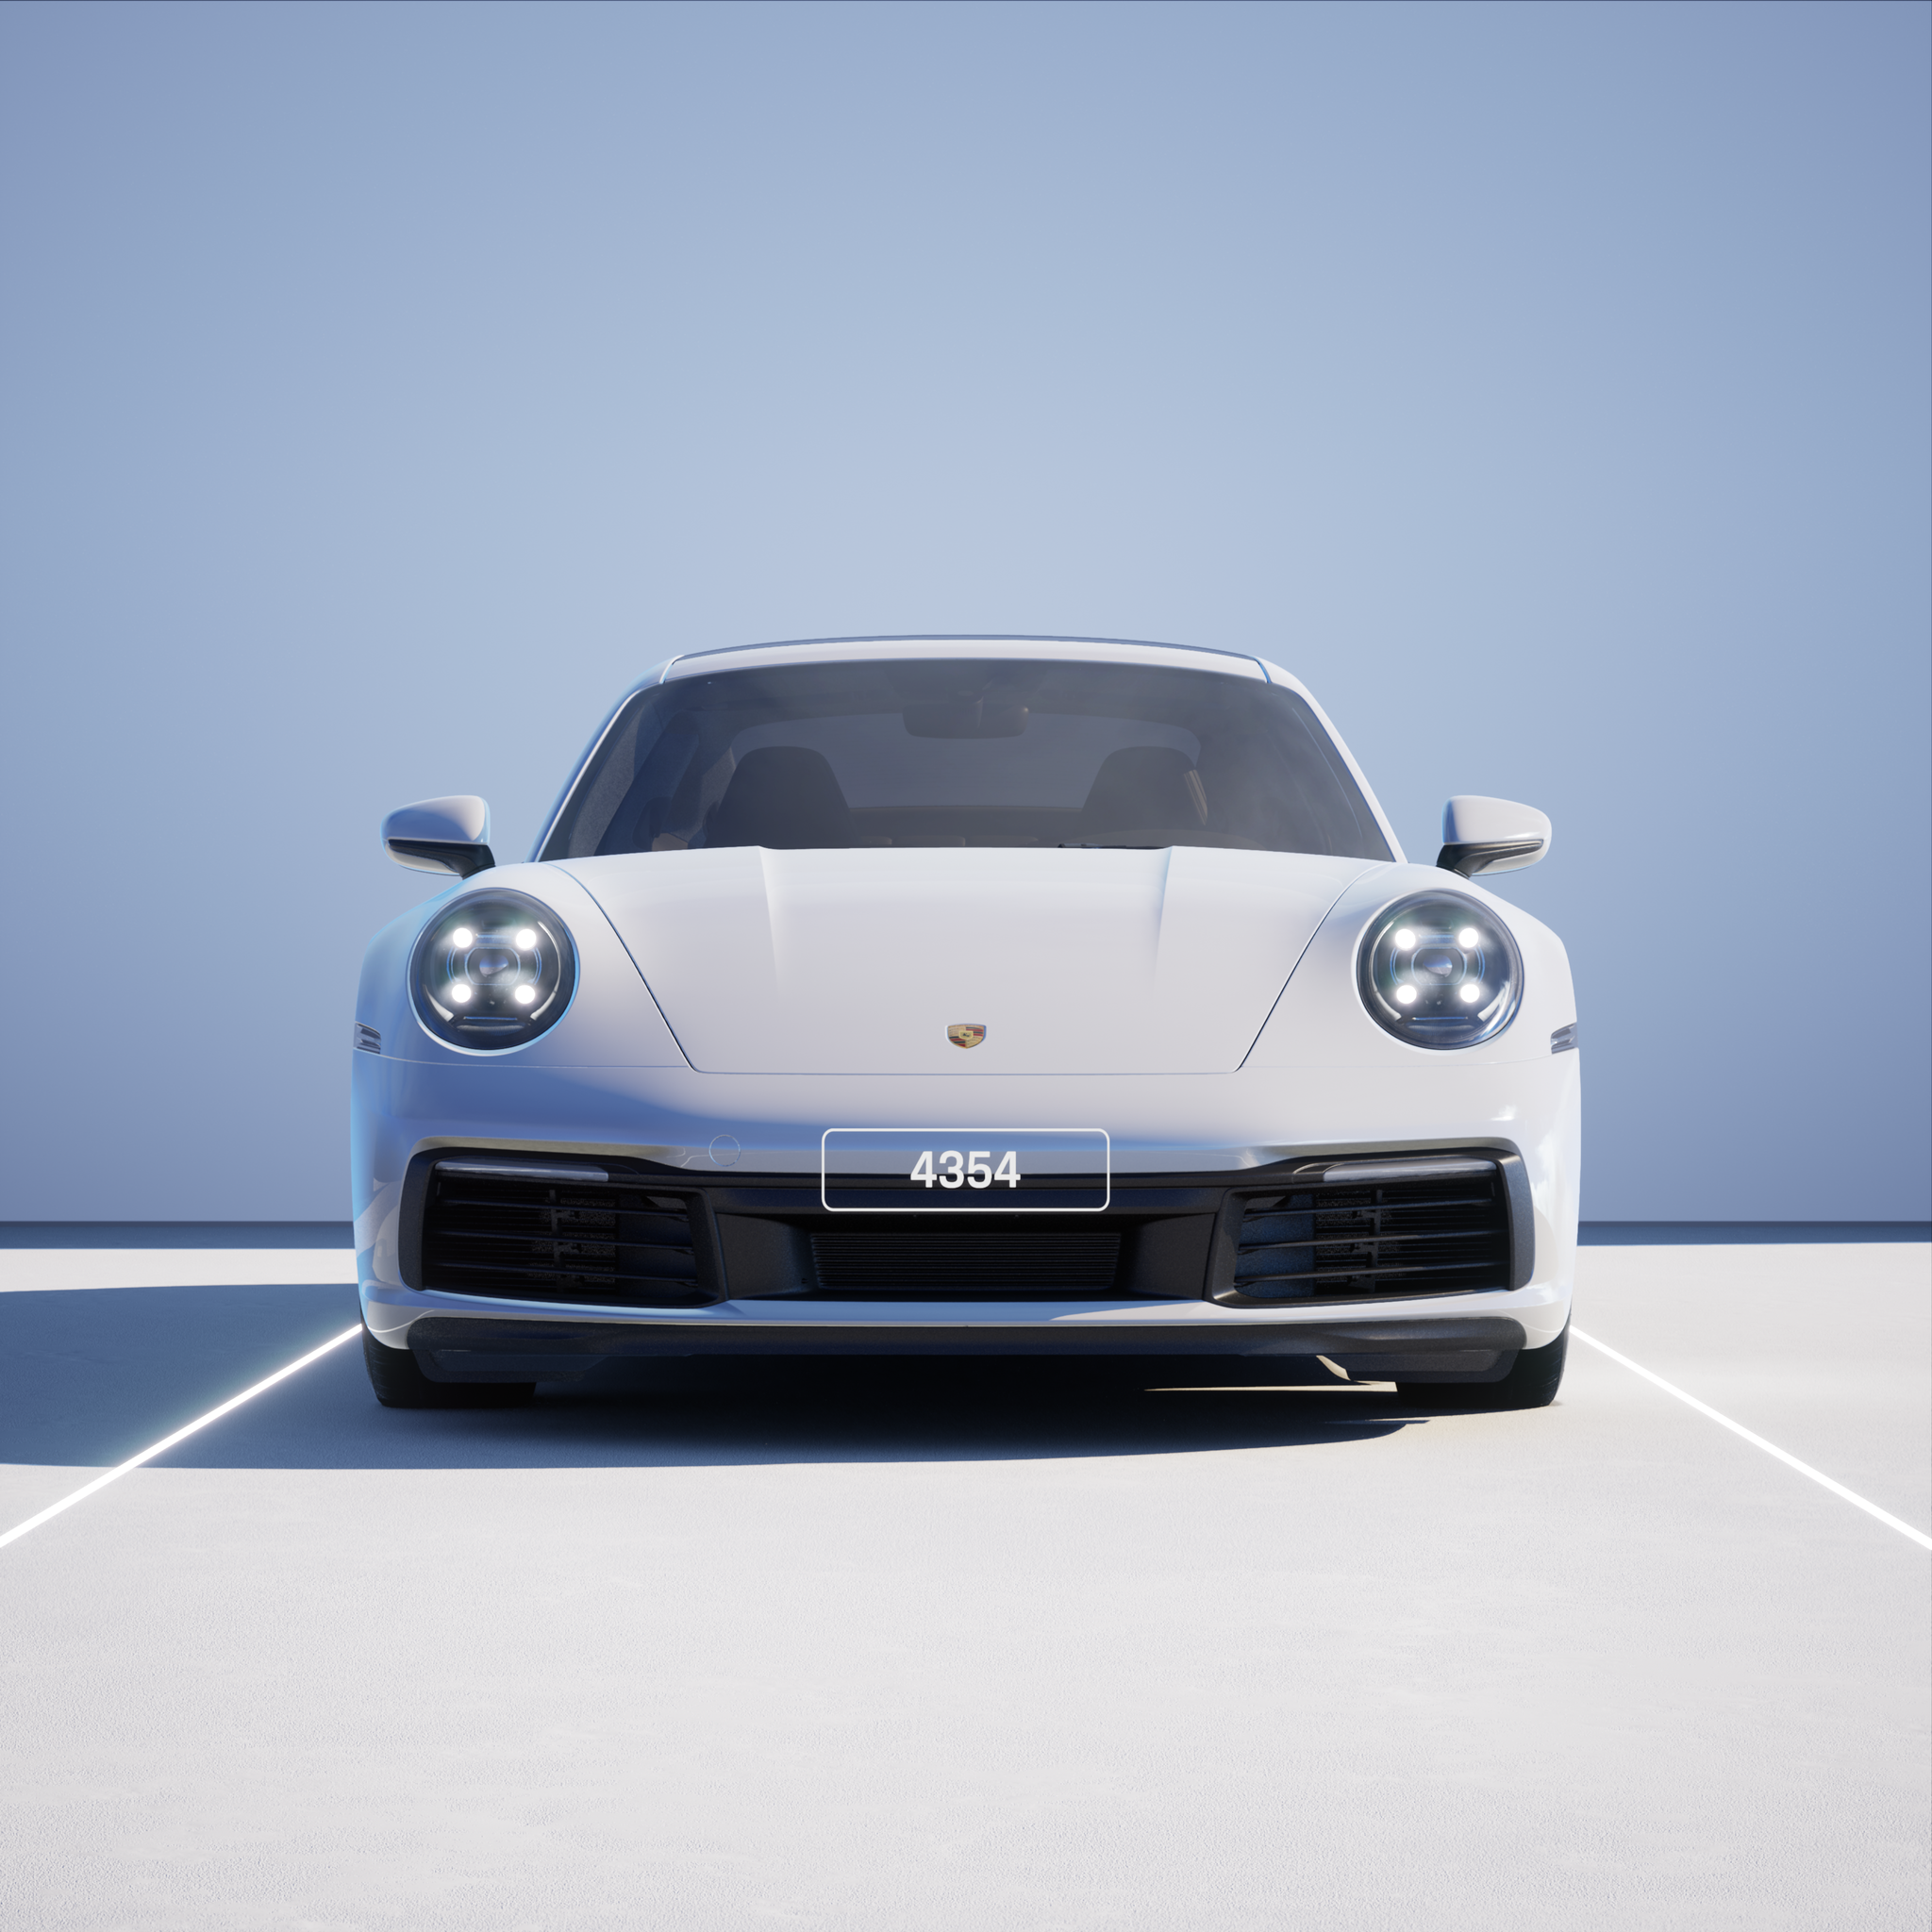 The PORSCHΞ 911 4354 image in phase